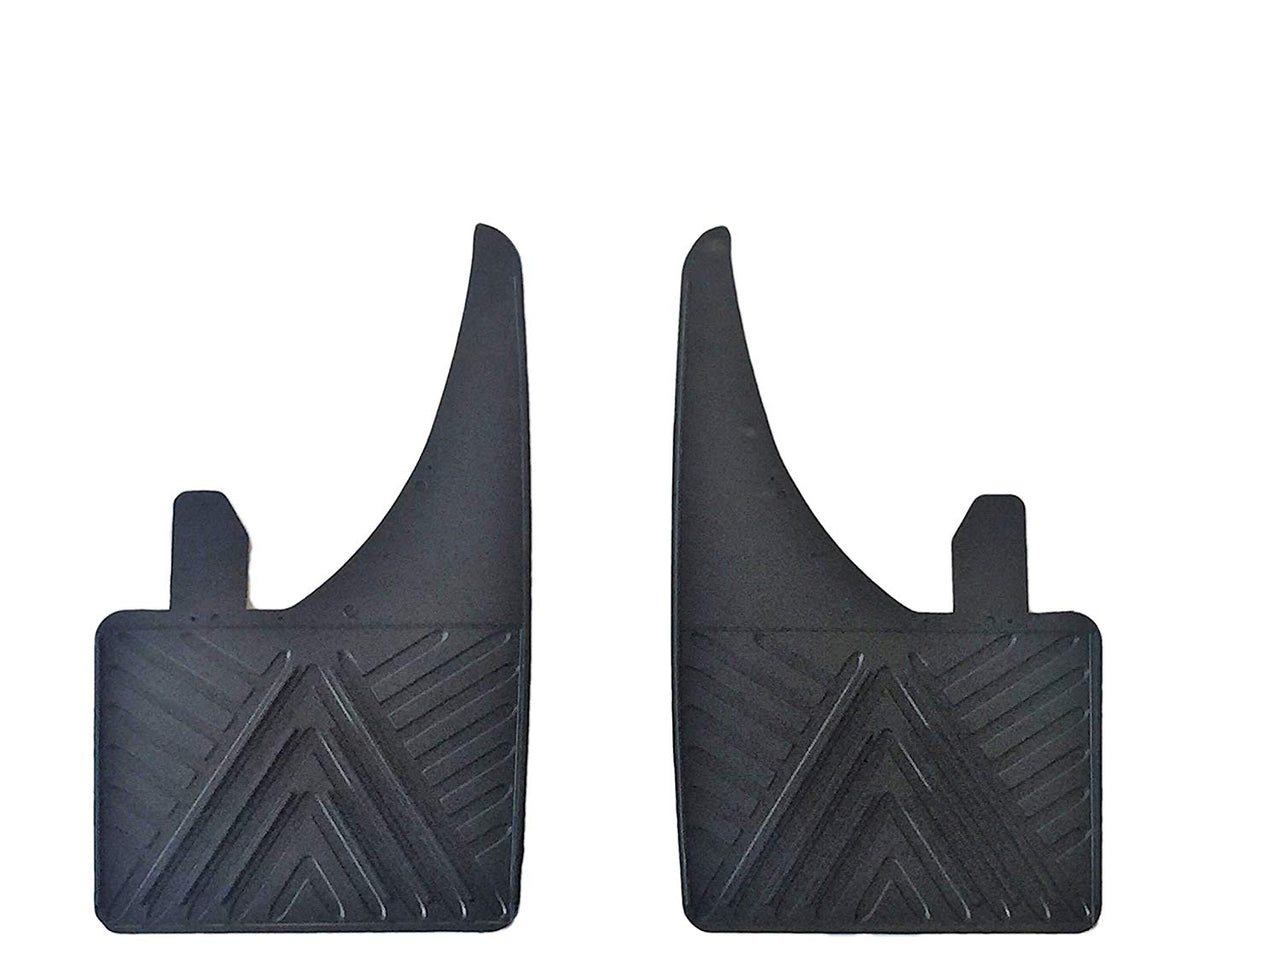 Genuine High Quality Mudflaps Fits Various Models including 500 124 126 Saloon or Hatchback - LK Auto Factors